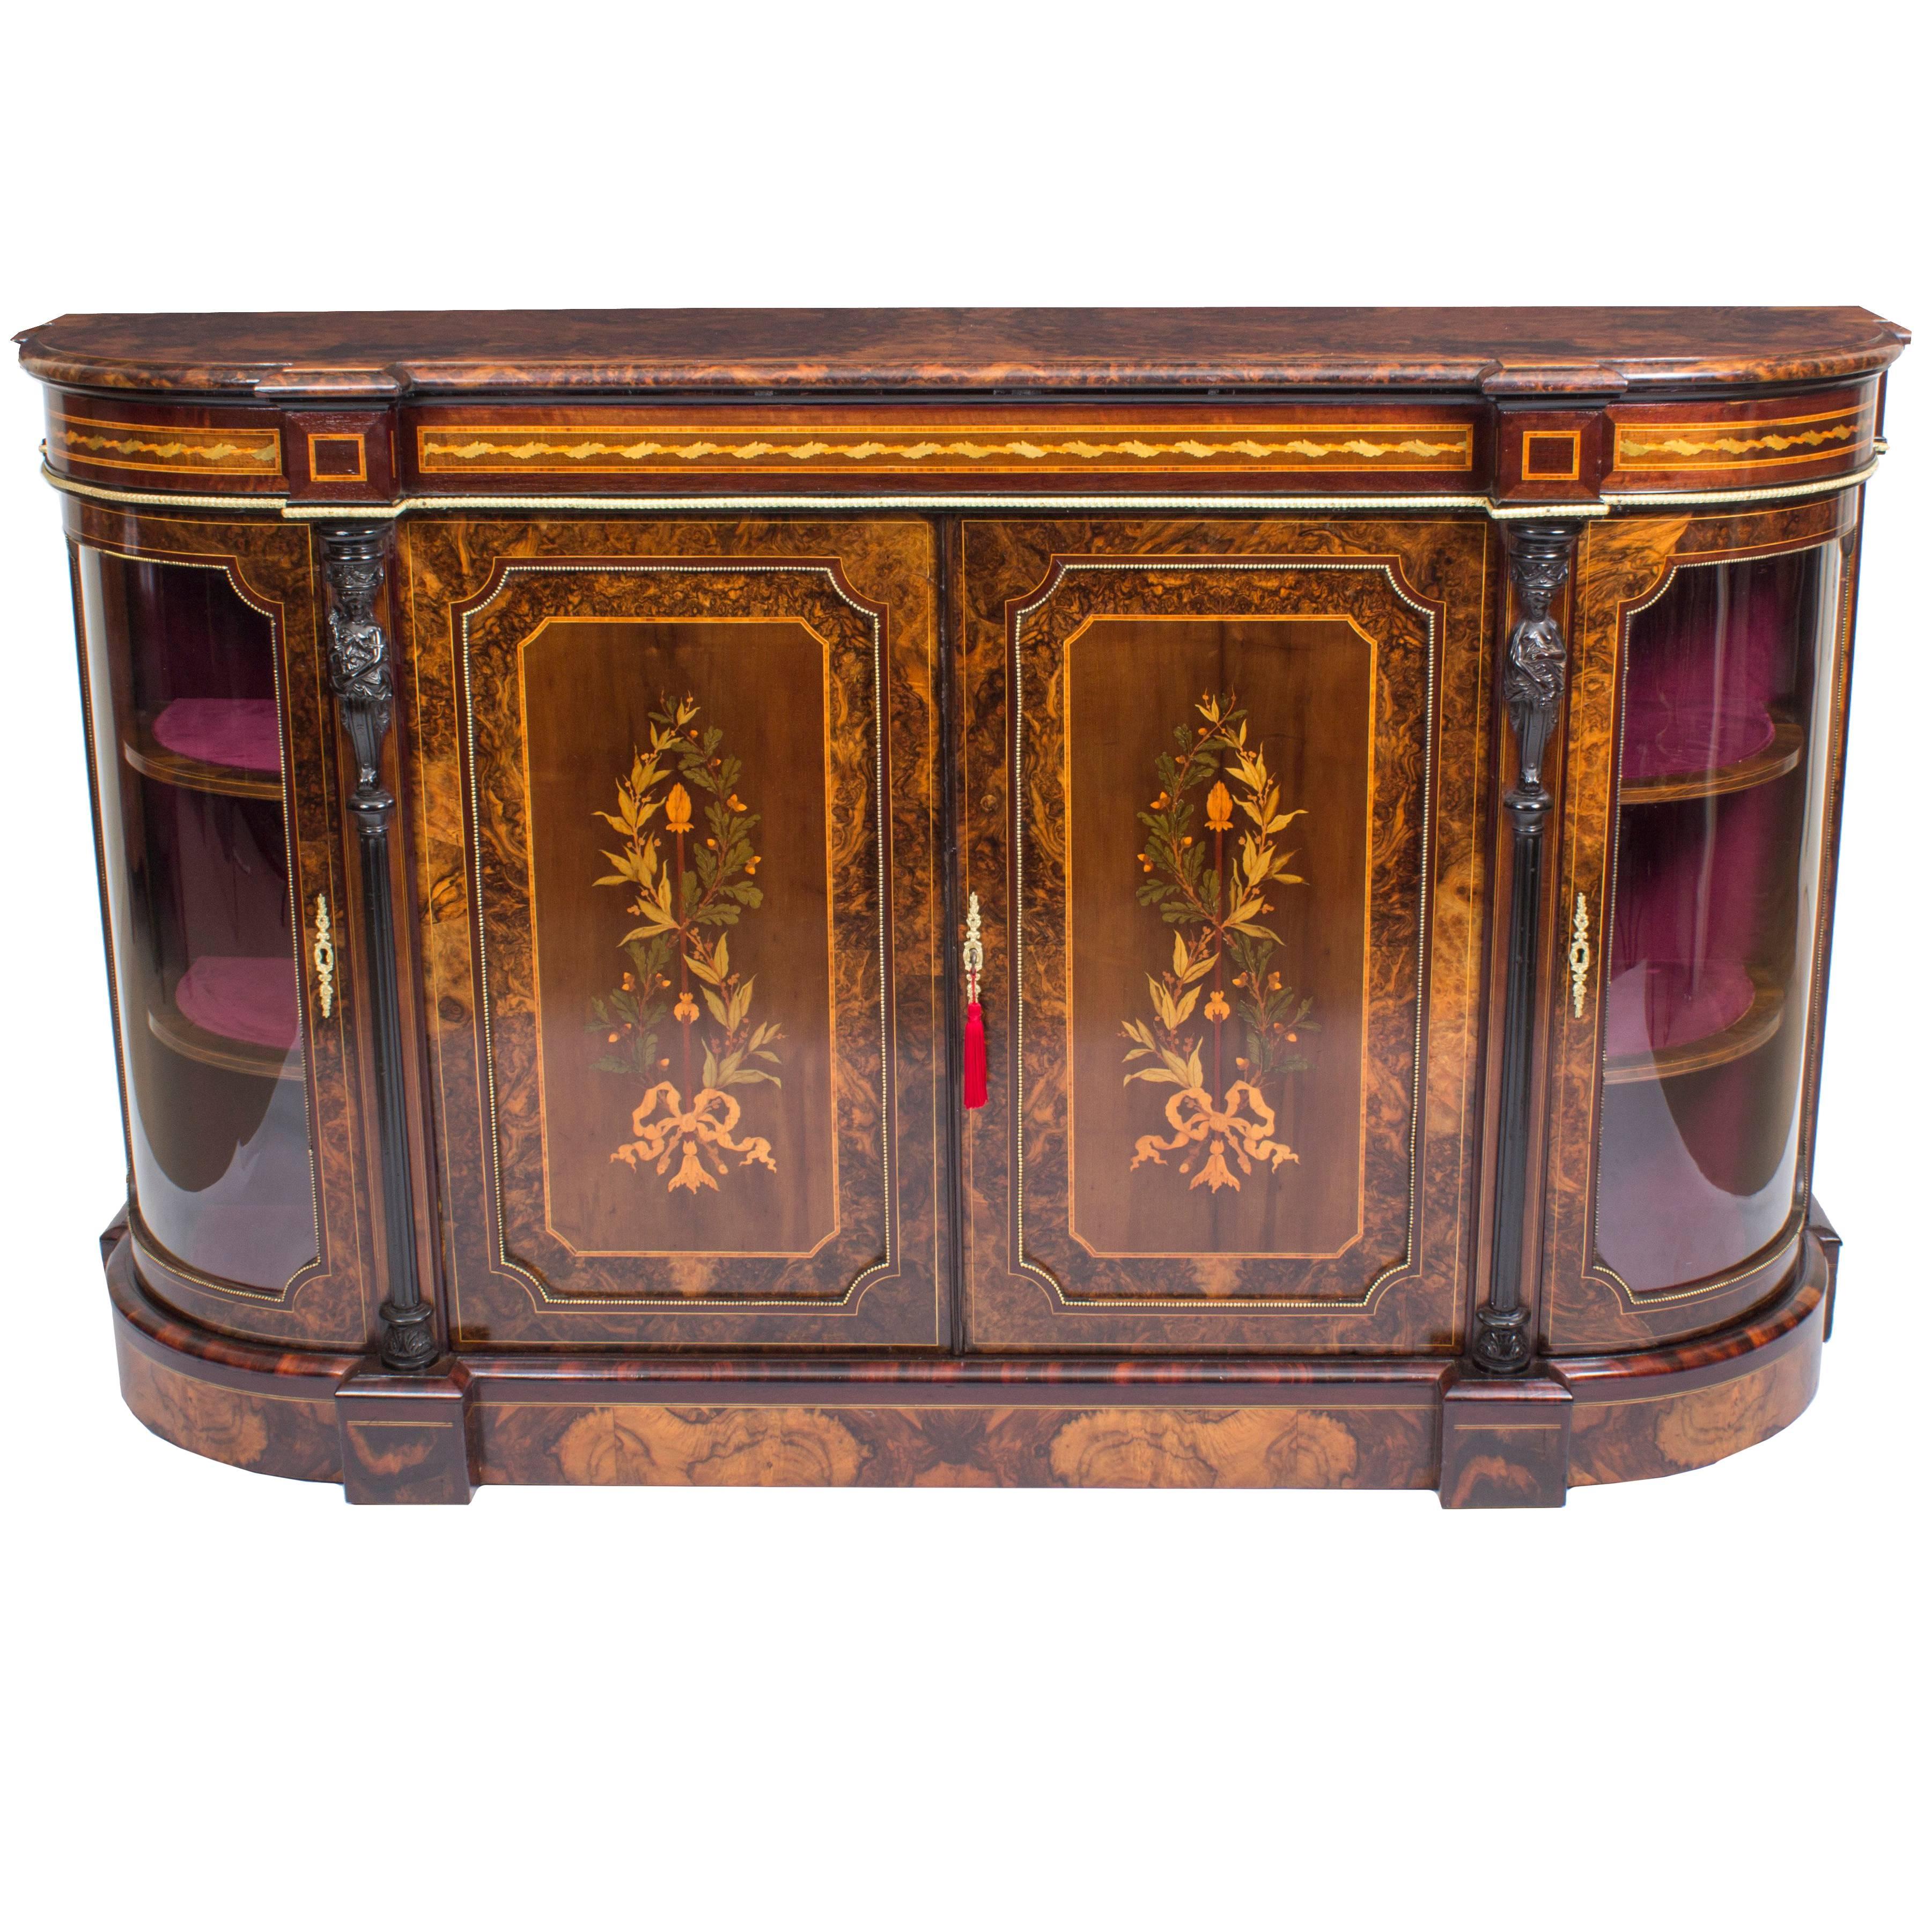 Antique Victorian Burr Walnut and Floral Marquetry Credenza, 19th Century